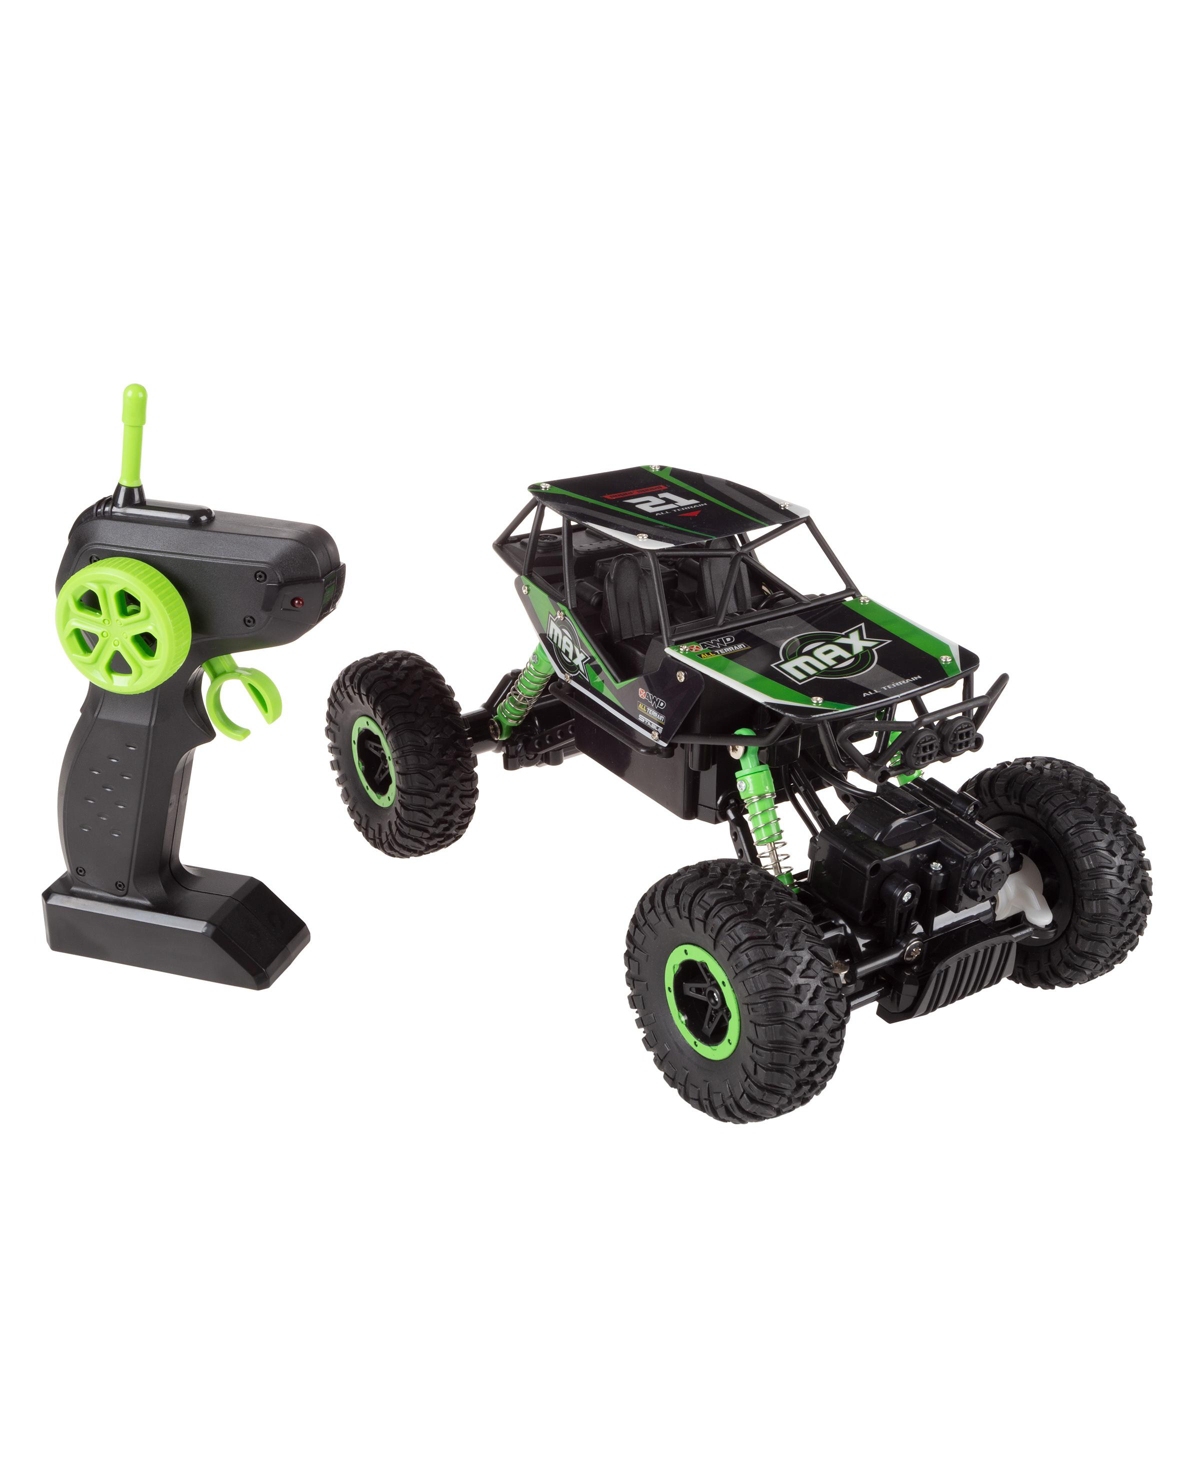 Trademark Global Remote Control Monster Truck 1:16 Scale In Green